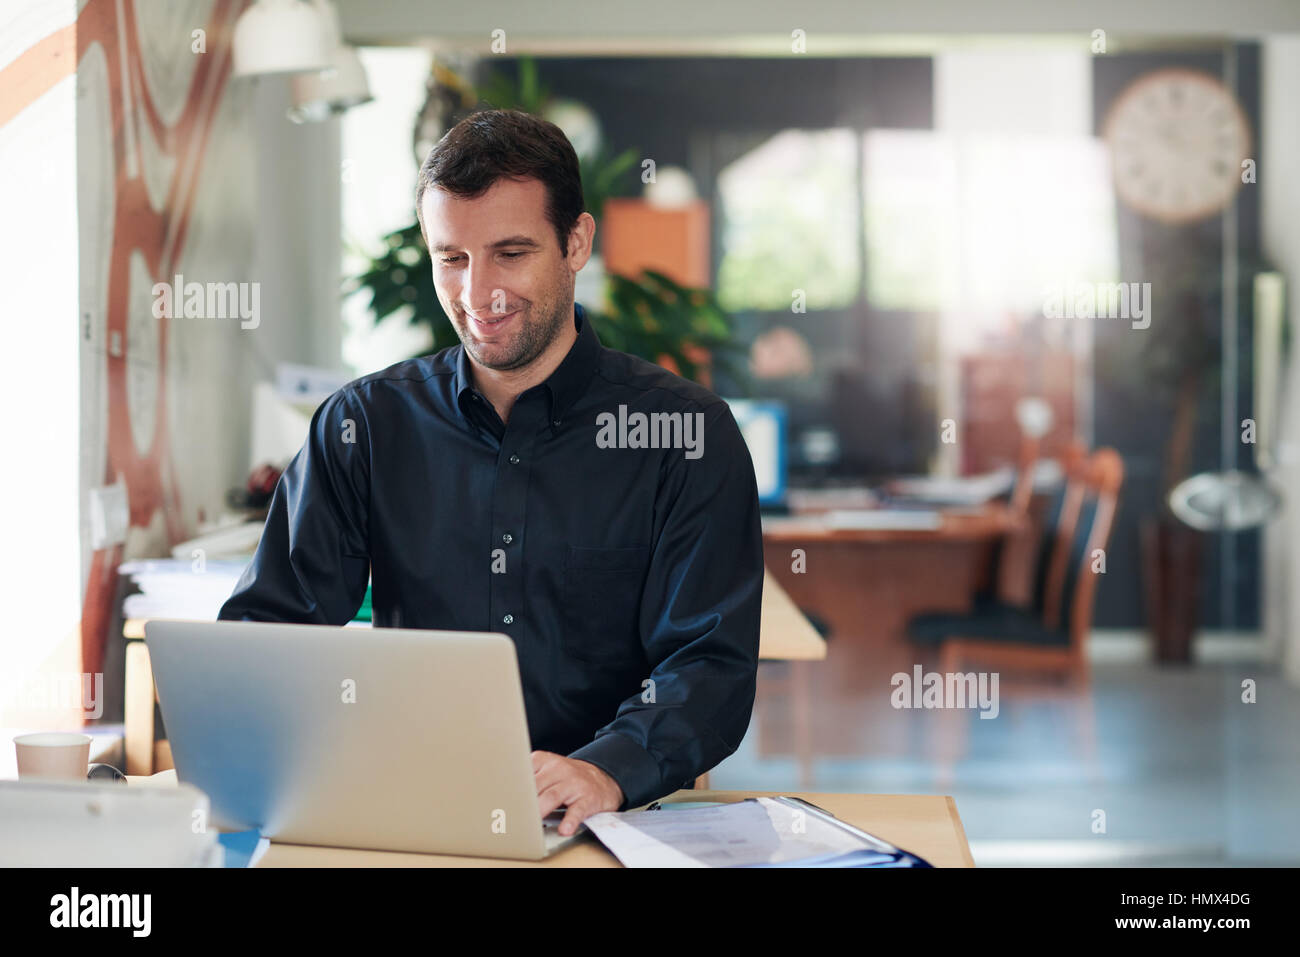 Smiling businessman working on a laptop at an office desk Stock Photo